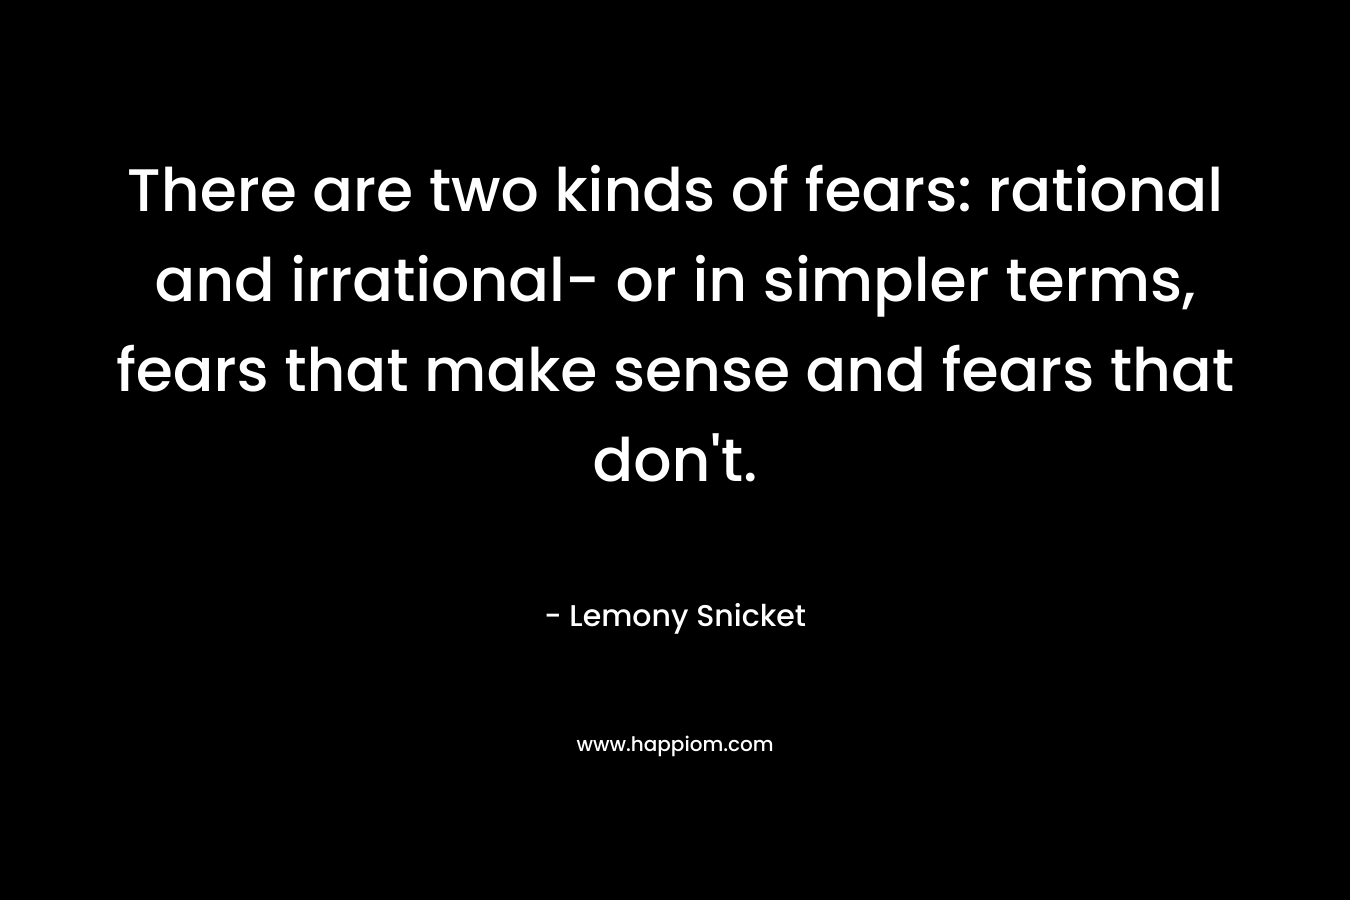 There are two kinds of fears: rational and irrational- or in simpler terms, fears that make sense and fears that don't.